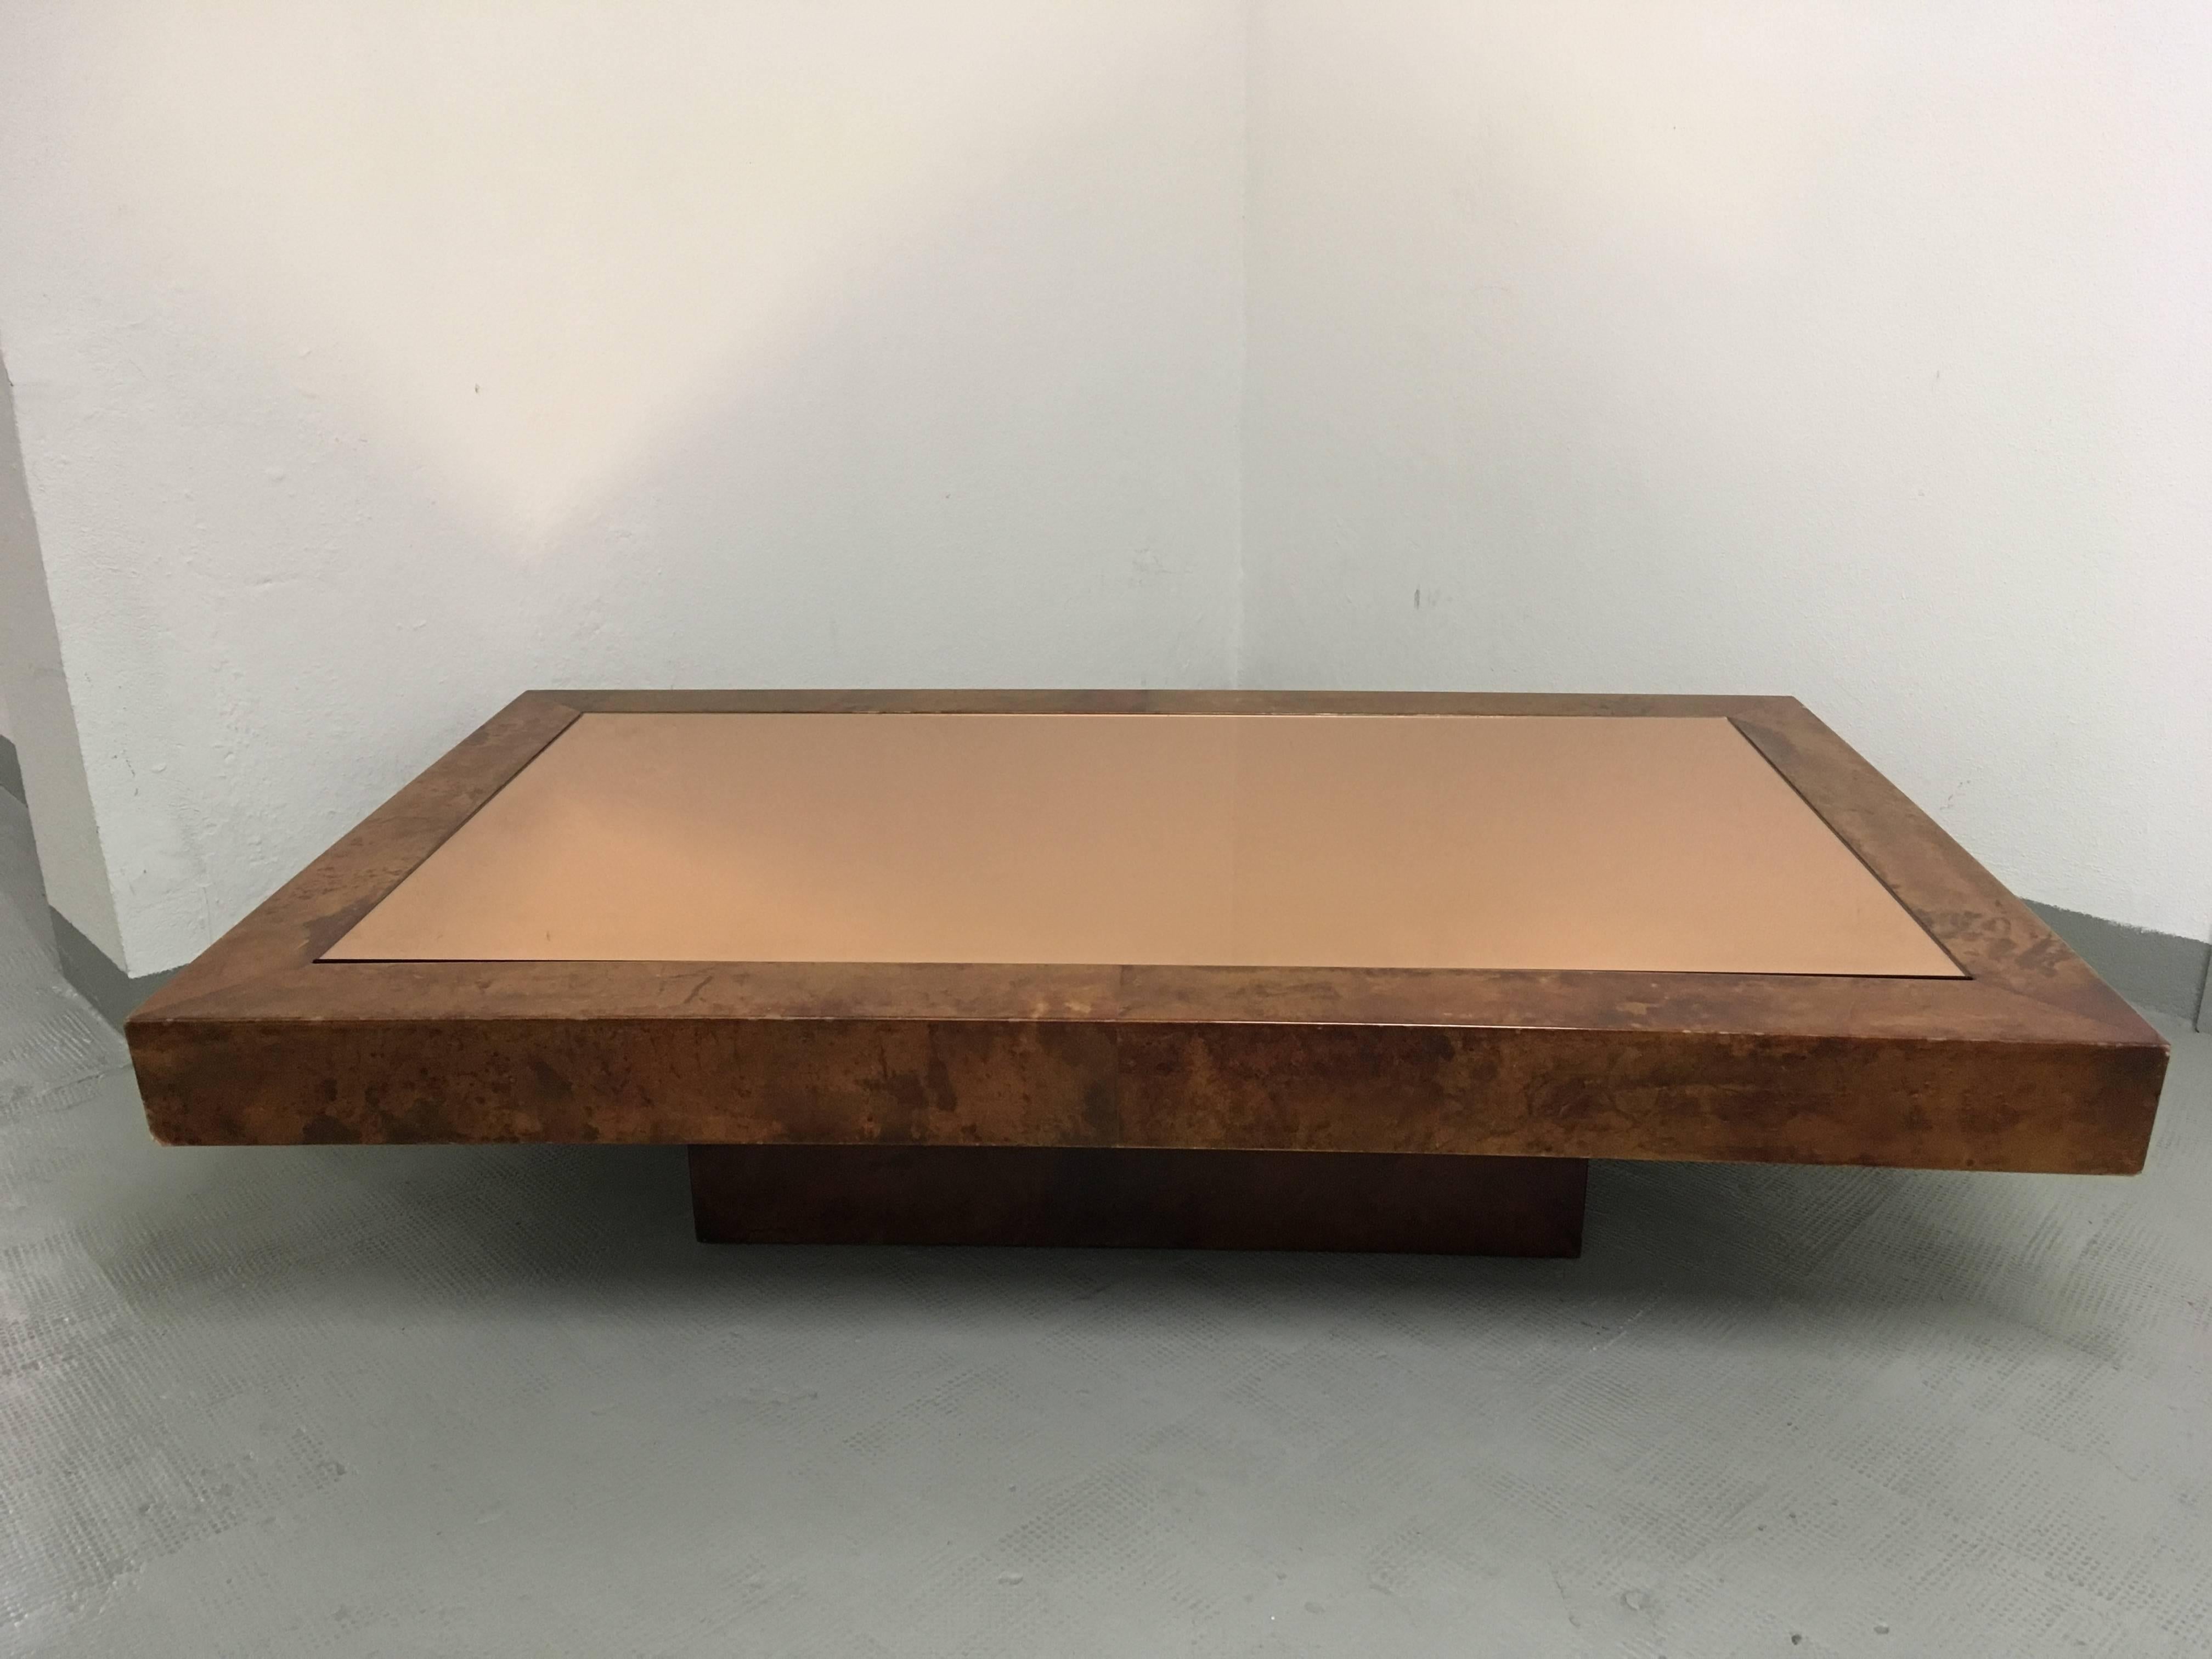 Aldo Tura Goatskin and glass coffee table
Few chips on the edges
Copper color glass top.